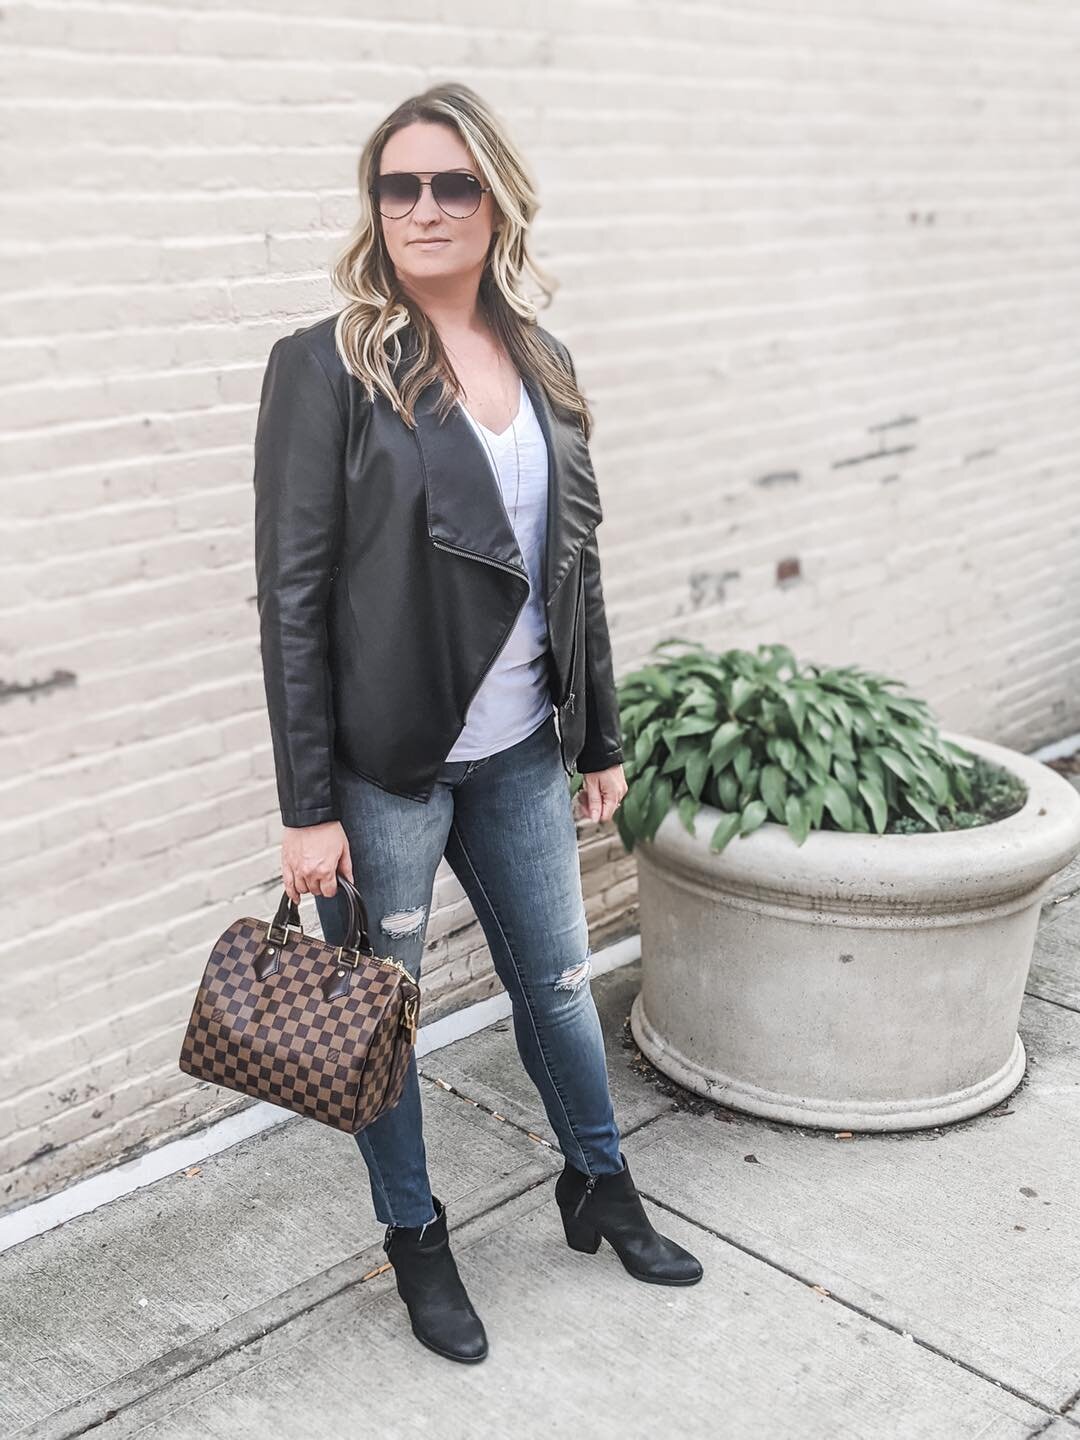 Outfit: Louis Vuitton Speedy & Brown Leather Jacket at Skyline